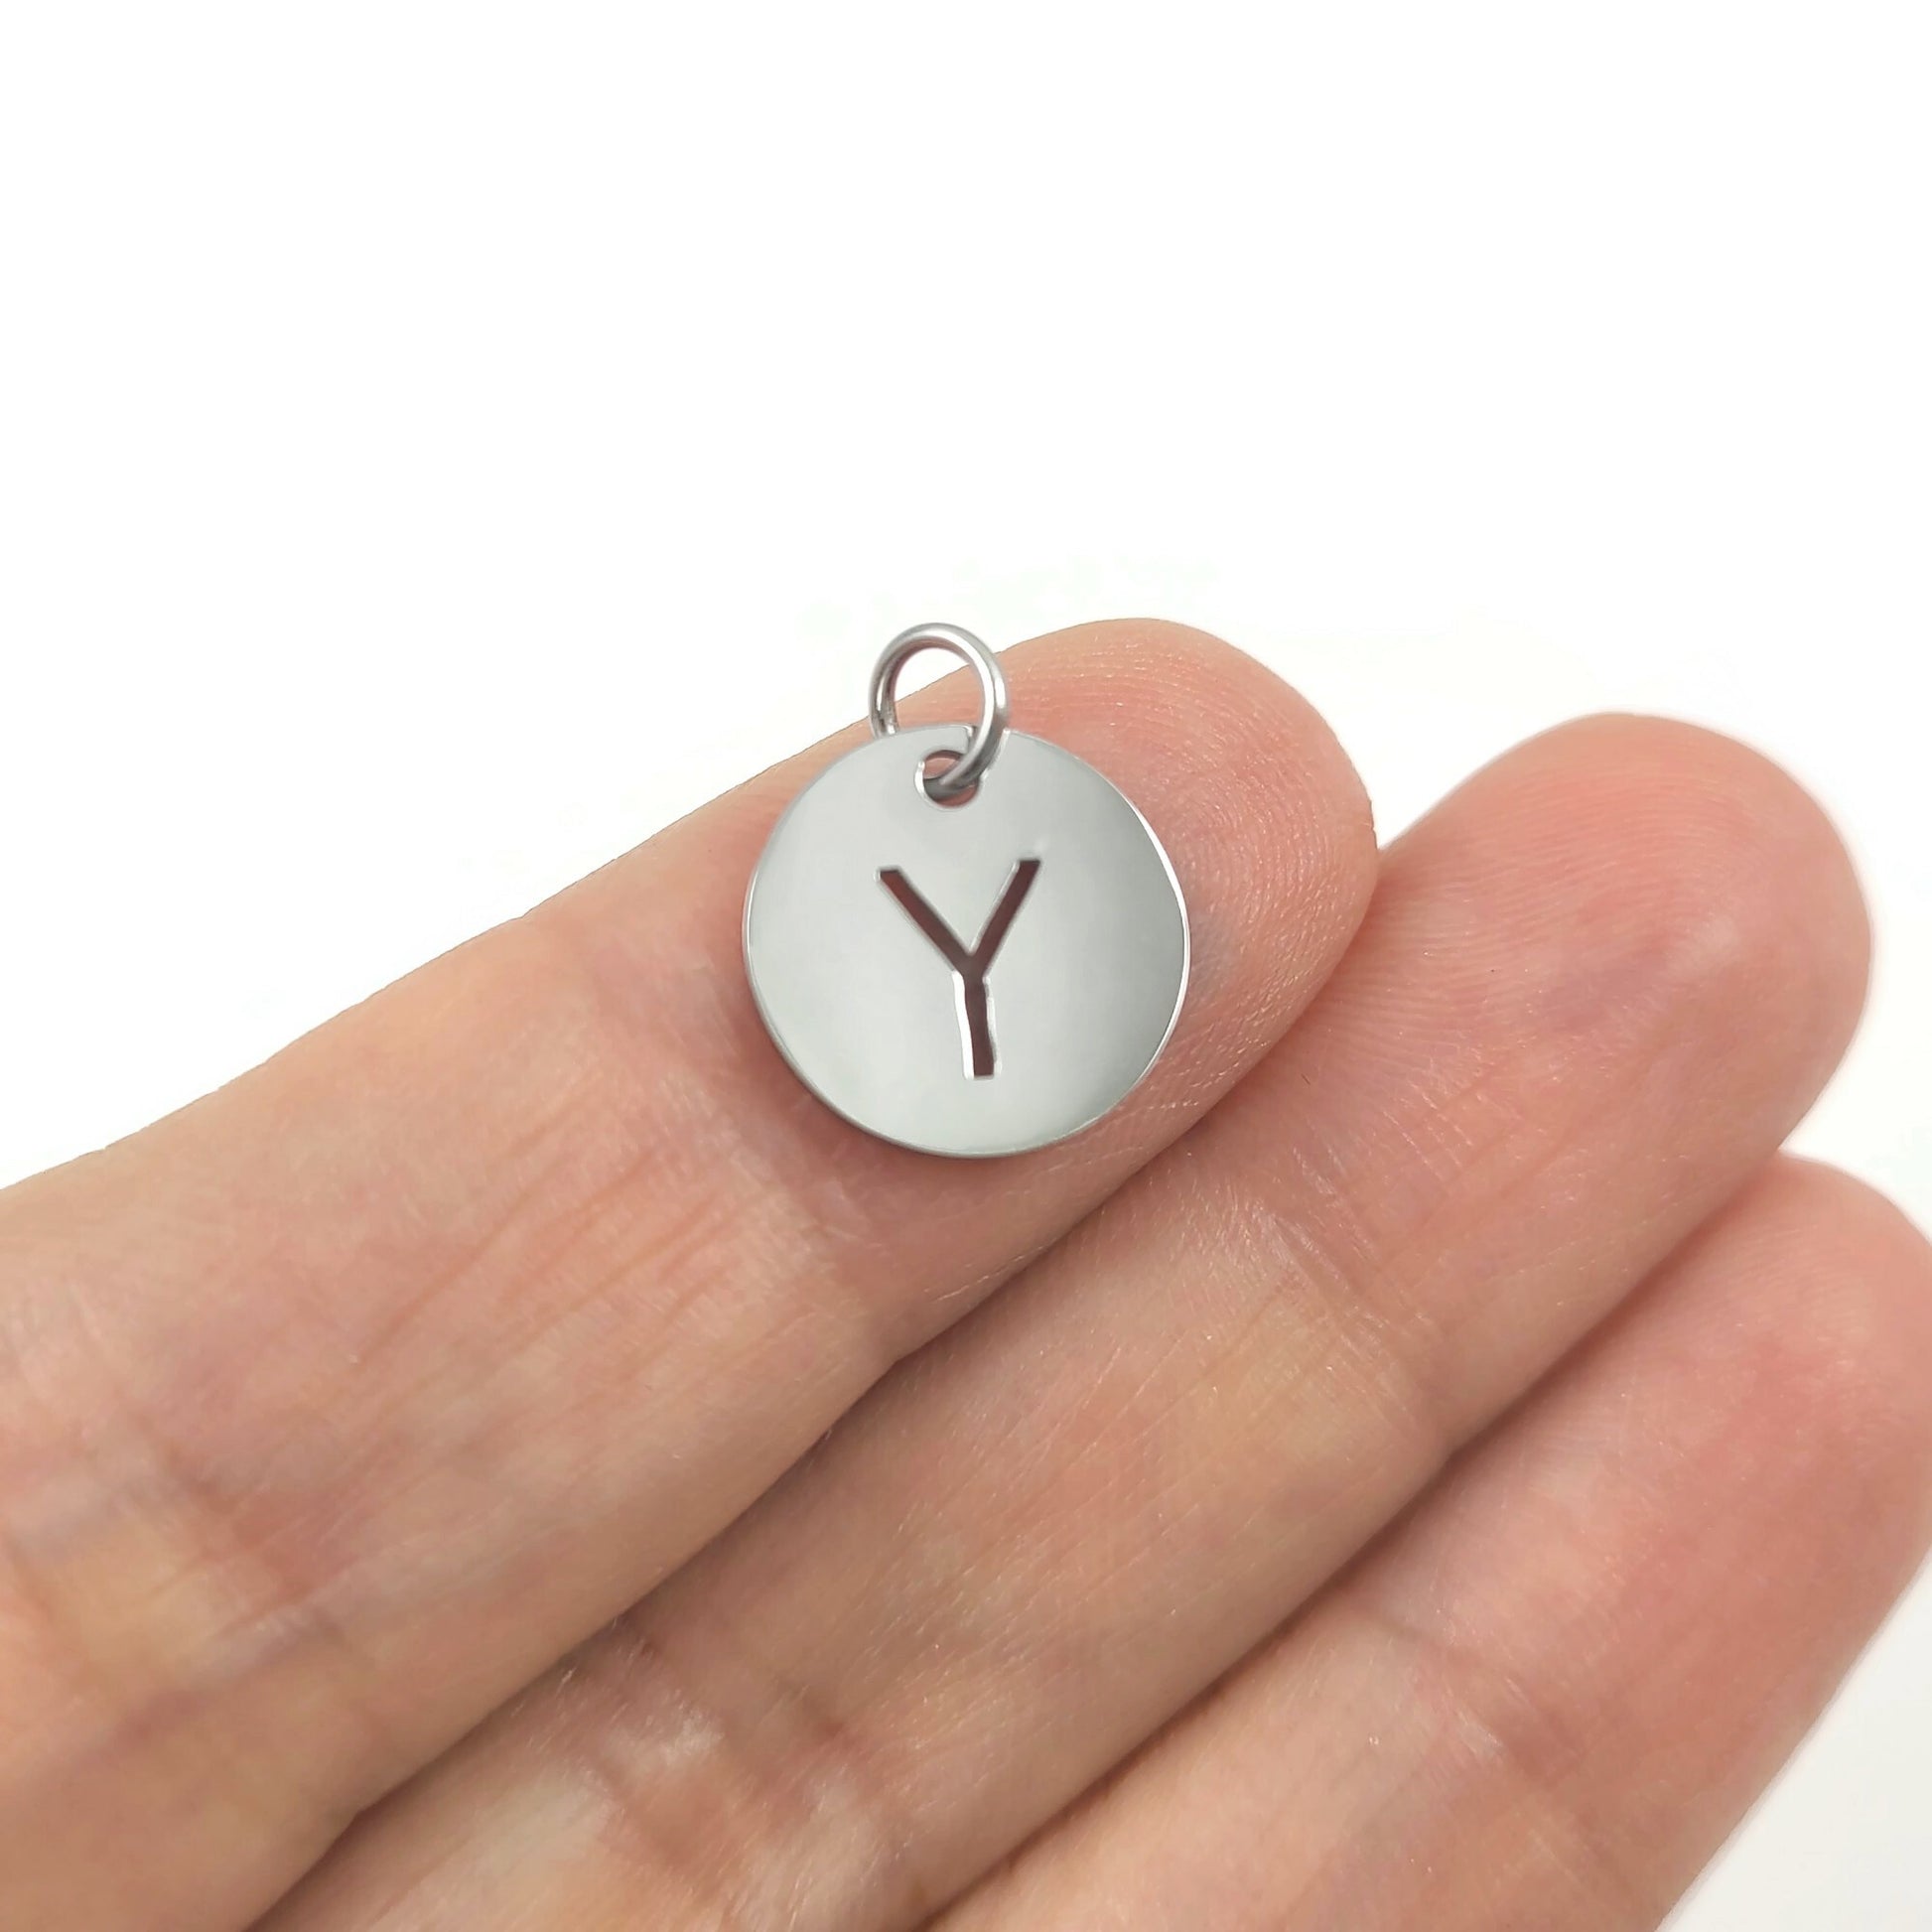 1 Stainless steel coin letter charm